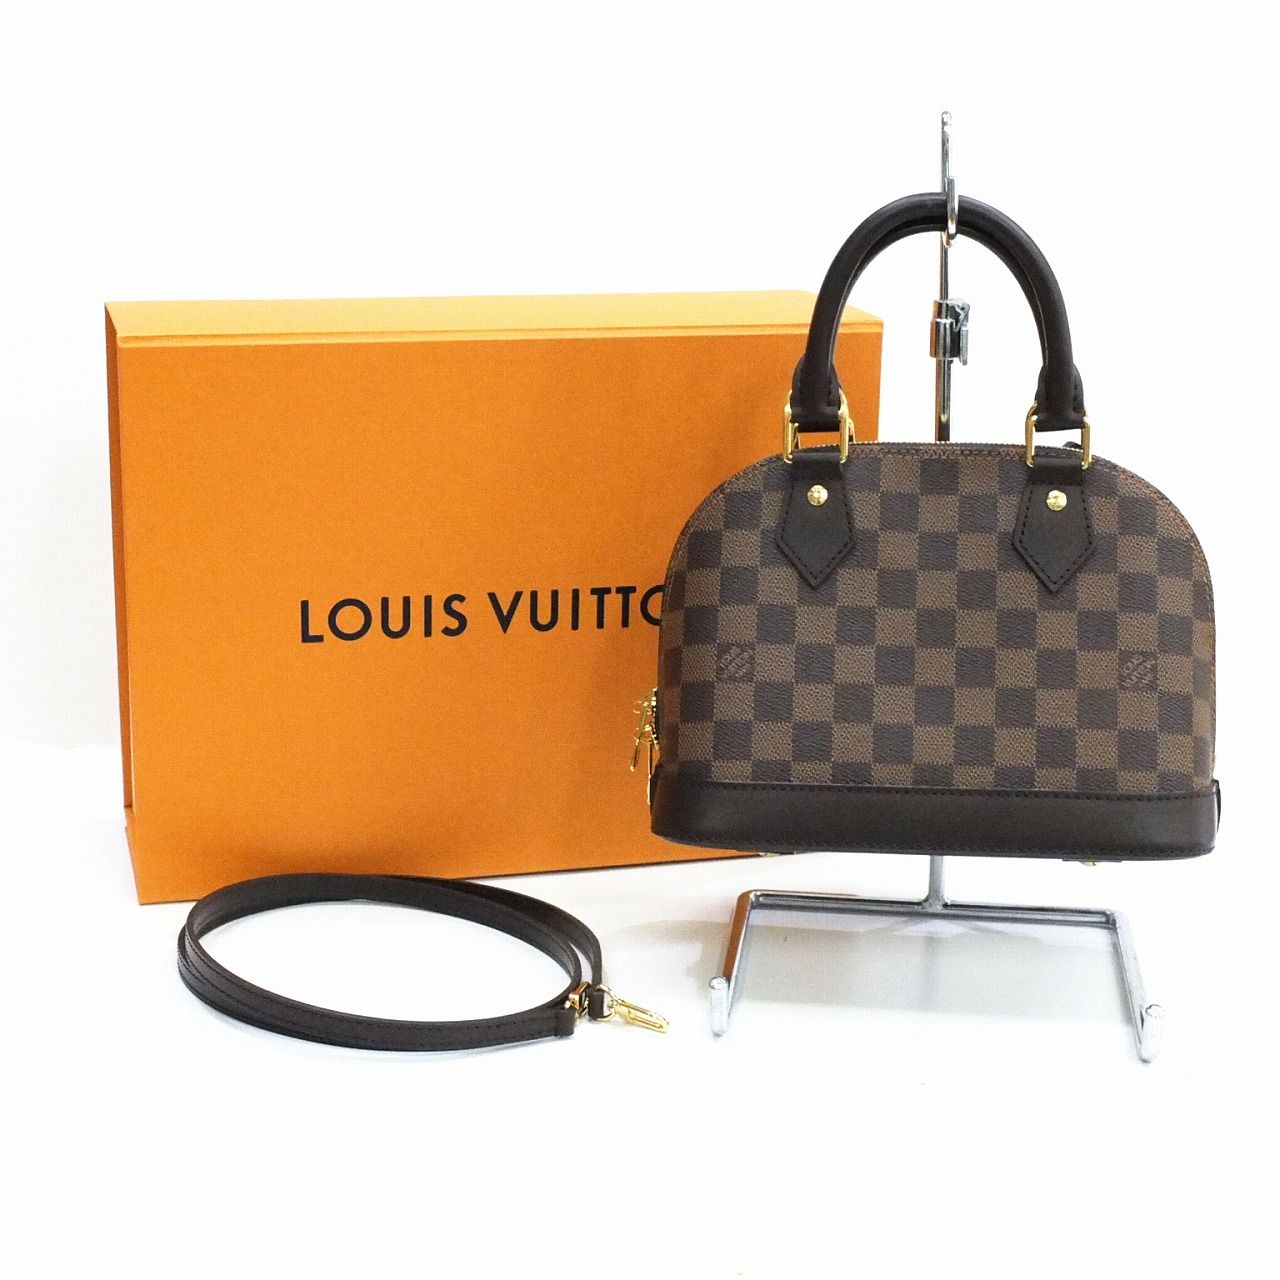 LOUIS VUITTON ルイヴィトン アルマ BB N41221 バッグ ダミエ 2WAY ...